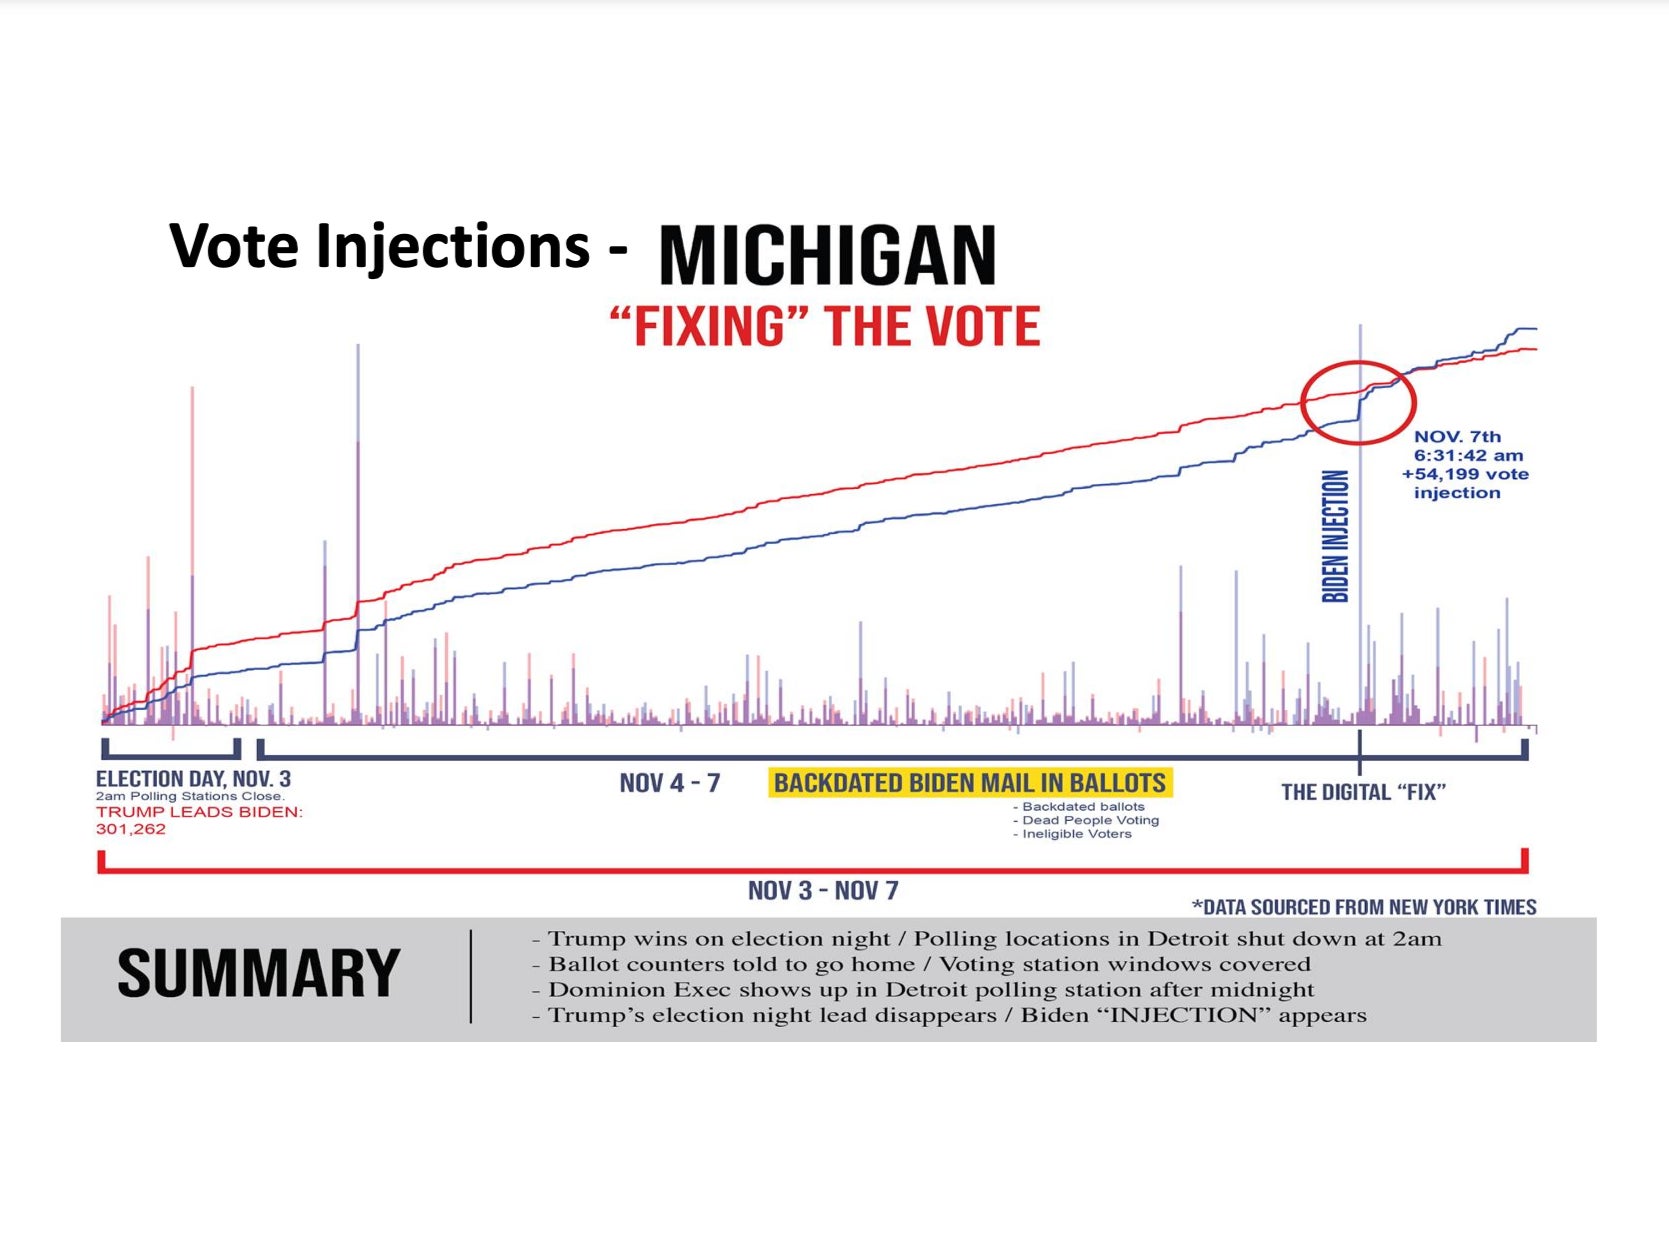 A graph claims to show ‘vote injections’ ‘fixing’ the results in Michigan